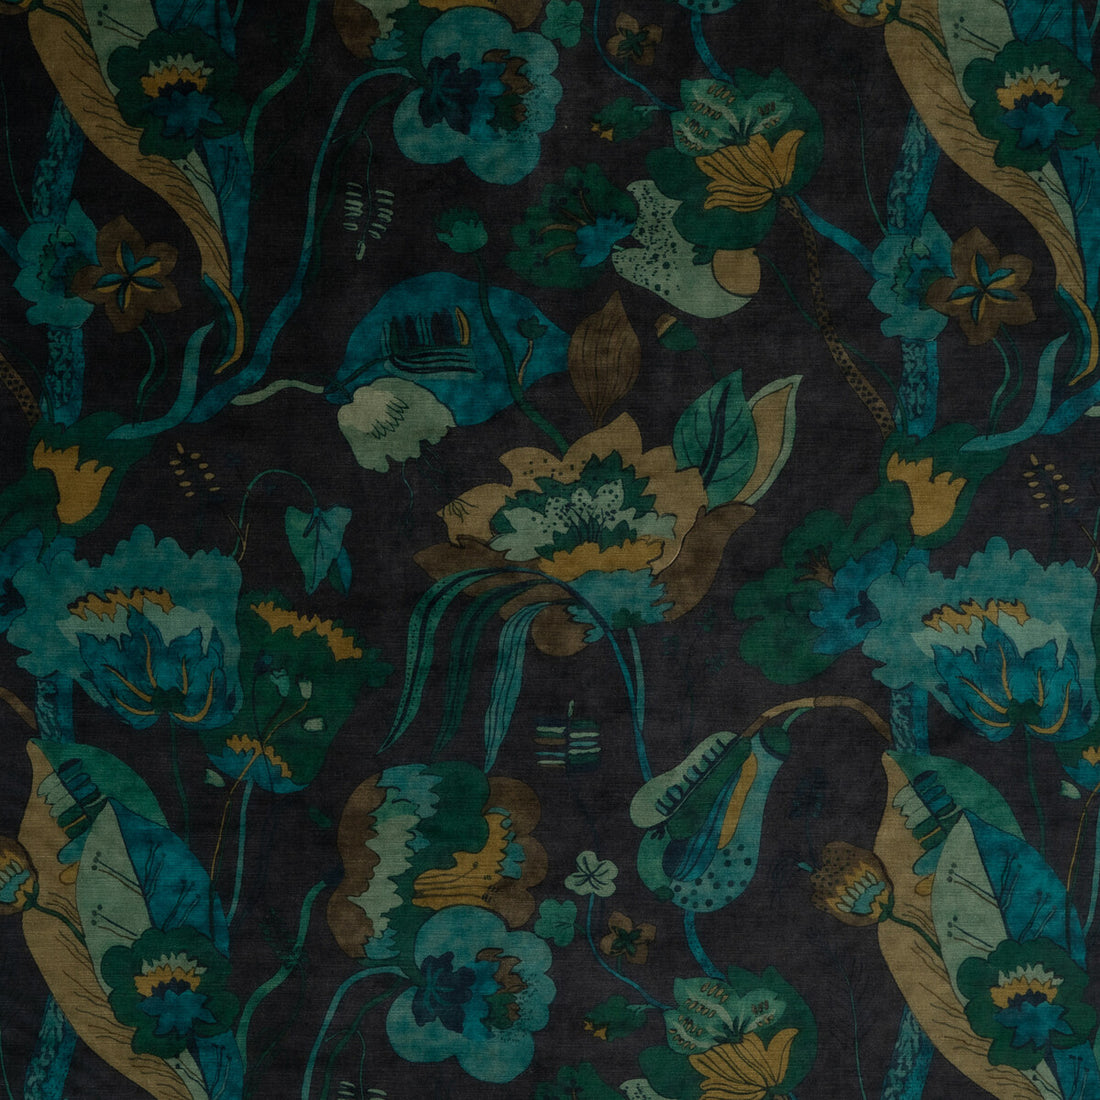 California Velvet fabric in indigo/teal color - pattern BP10813.1.0 - by G P &amp; J Baker in the Signature Velvets collection